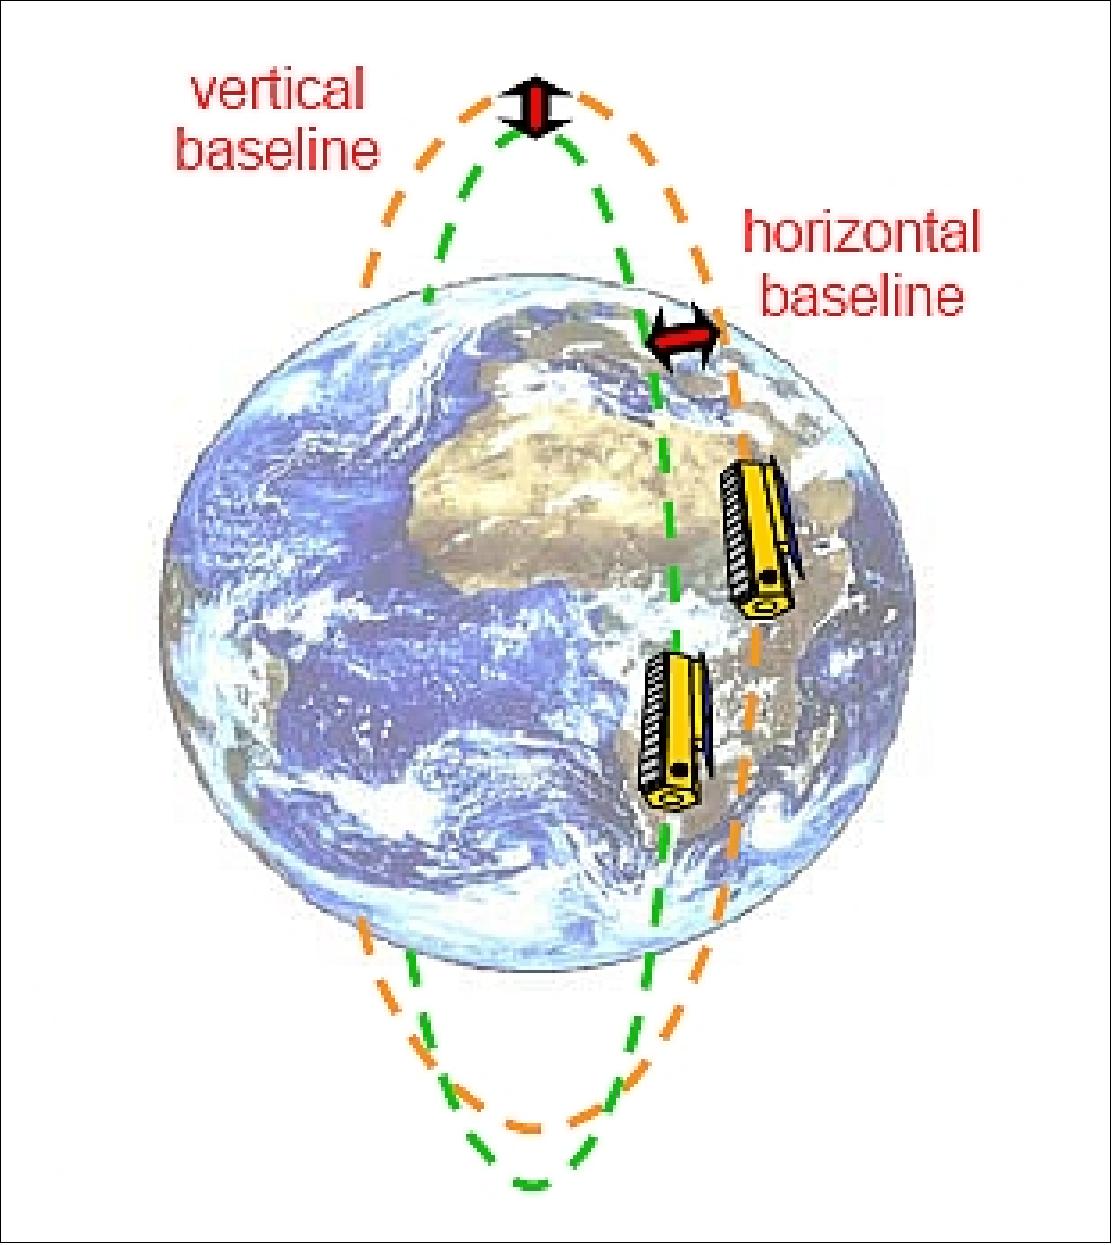 Figure 5: Illustration of the Helix orbit configuration of both spacecraft (image credit: DLR)